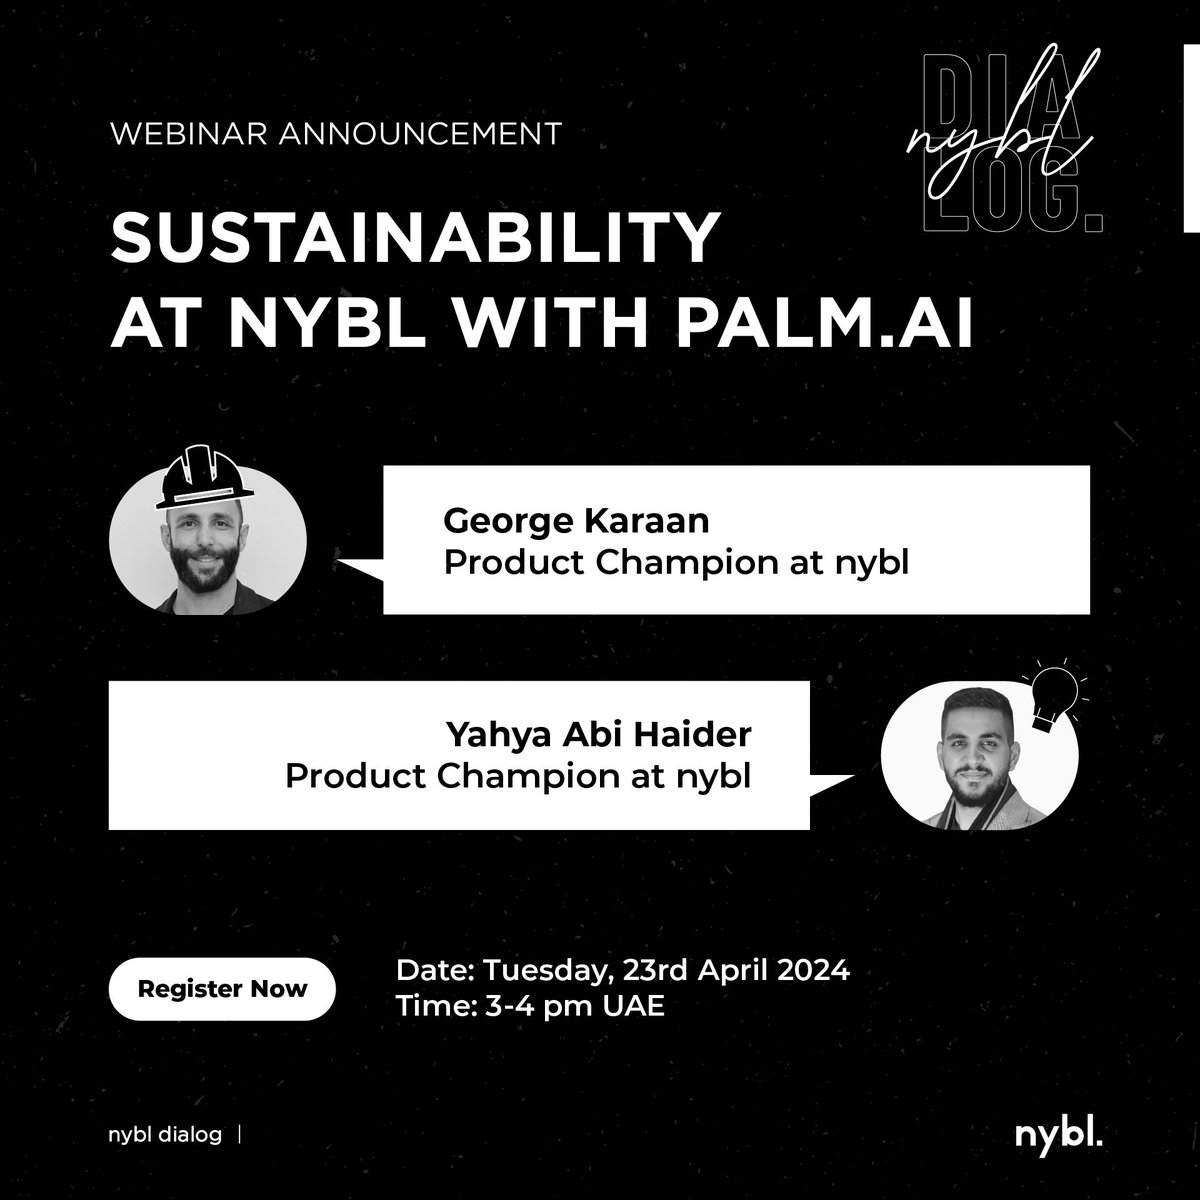 One week to go until nybl Dialog! 🌍✨ nybl’s upcoming #webinar will be on '#Sustainability at nybl with Palm.ai', on the applications of #AI in driving sustainability within the #agricultural sector. Secure your spot now: buff.ly/3vvFkcc #EarthDay